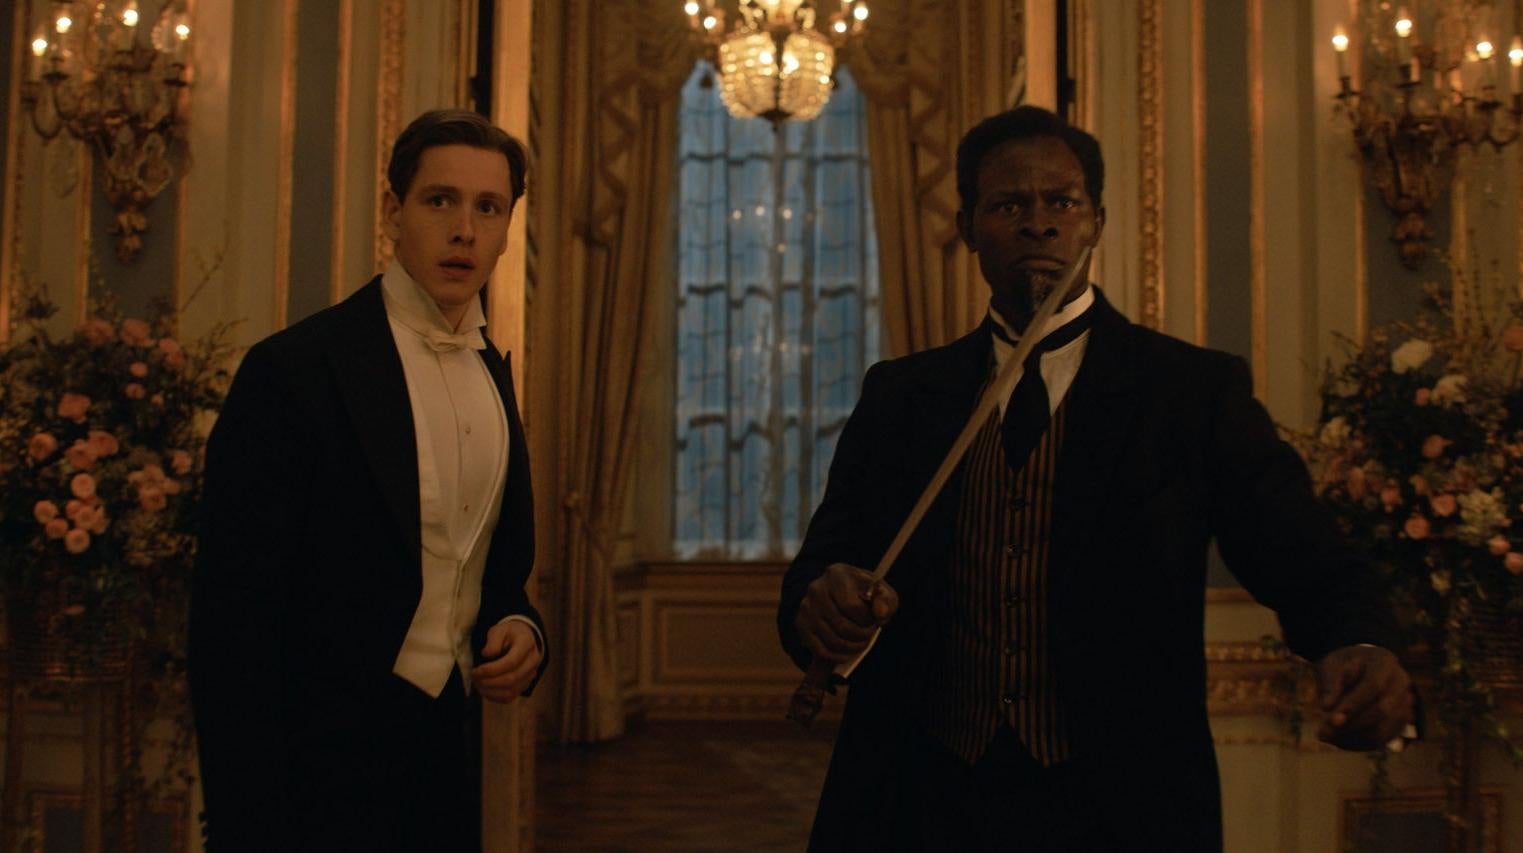 Harris Dickinson and Djimon Hounsou get ready to battle in The King's Man. (Image: 20th Century Studios)